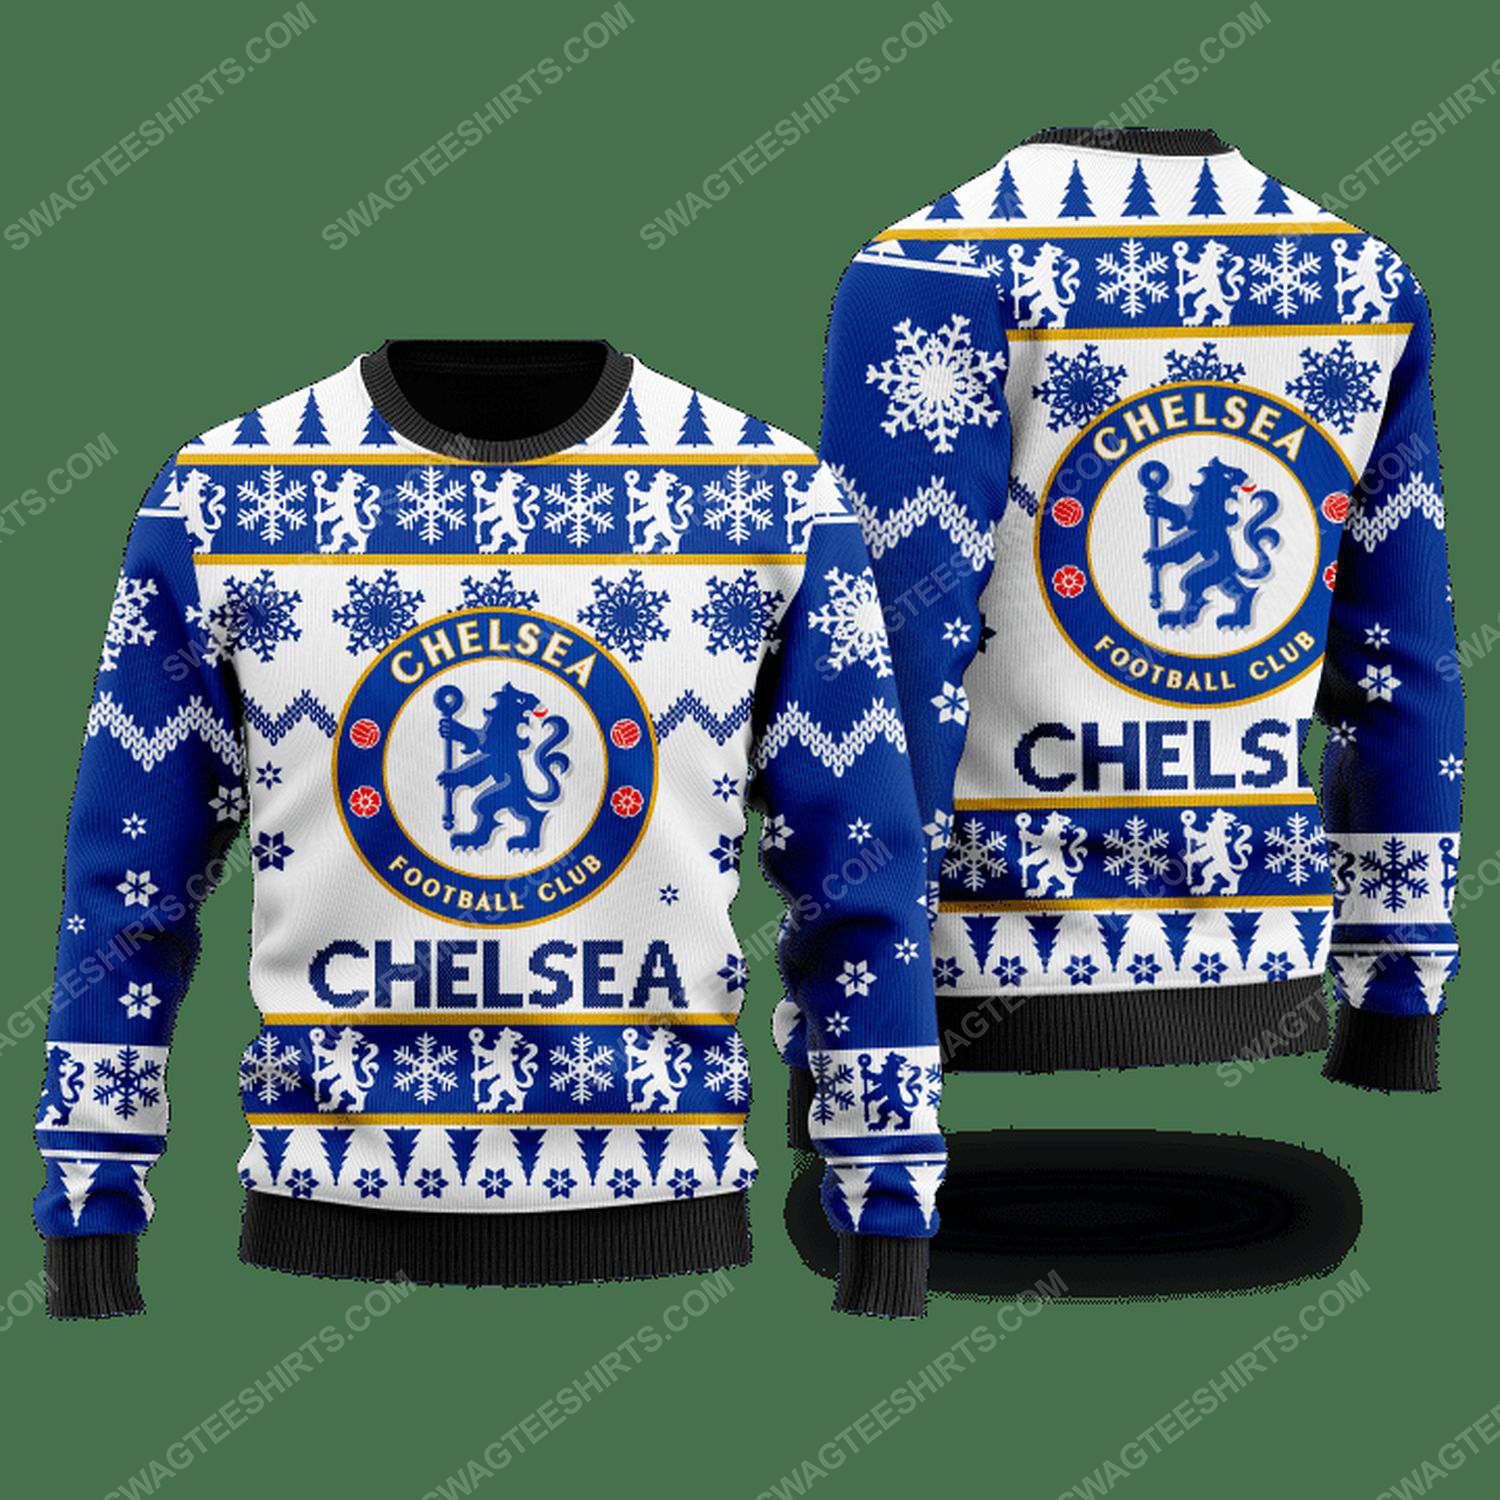 Chelsea football club ugly christmas sweater